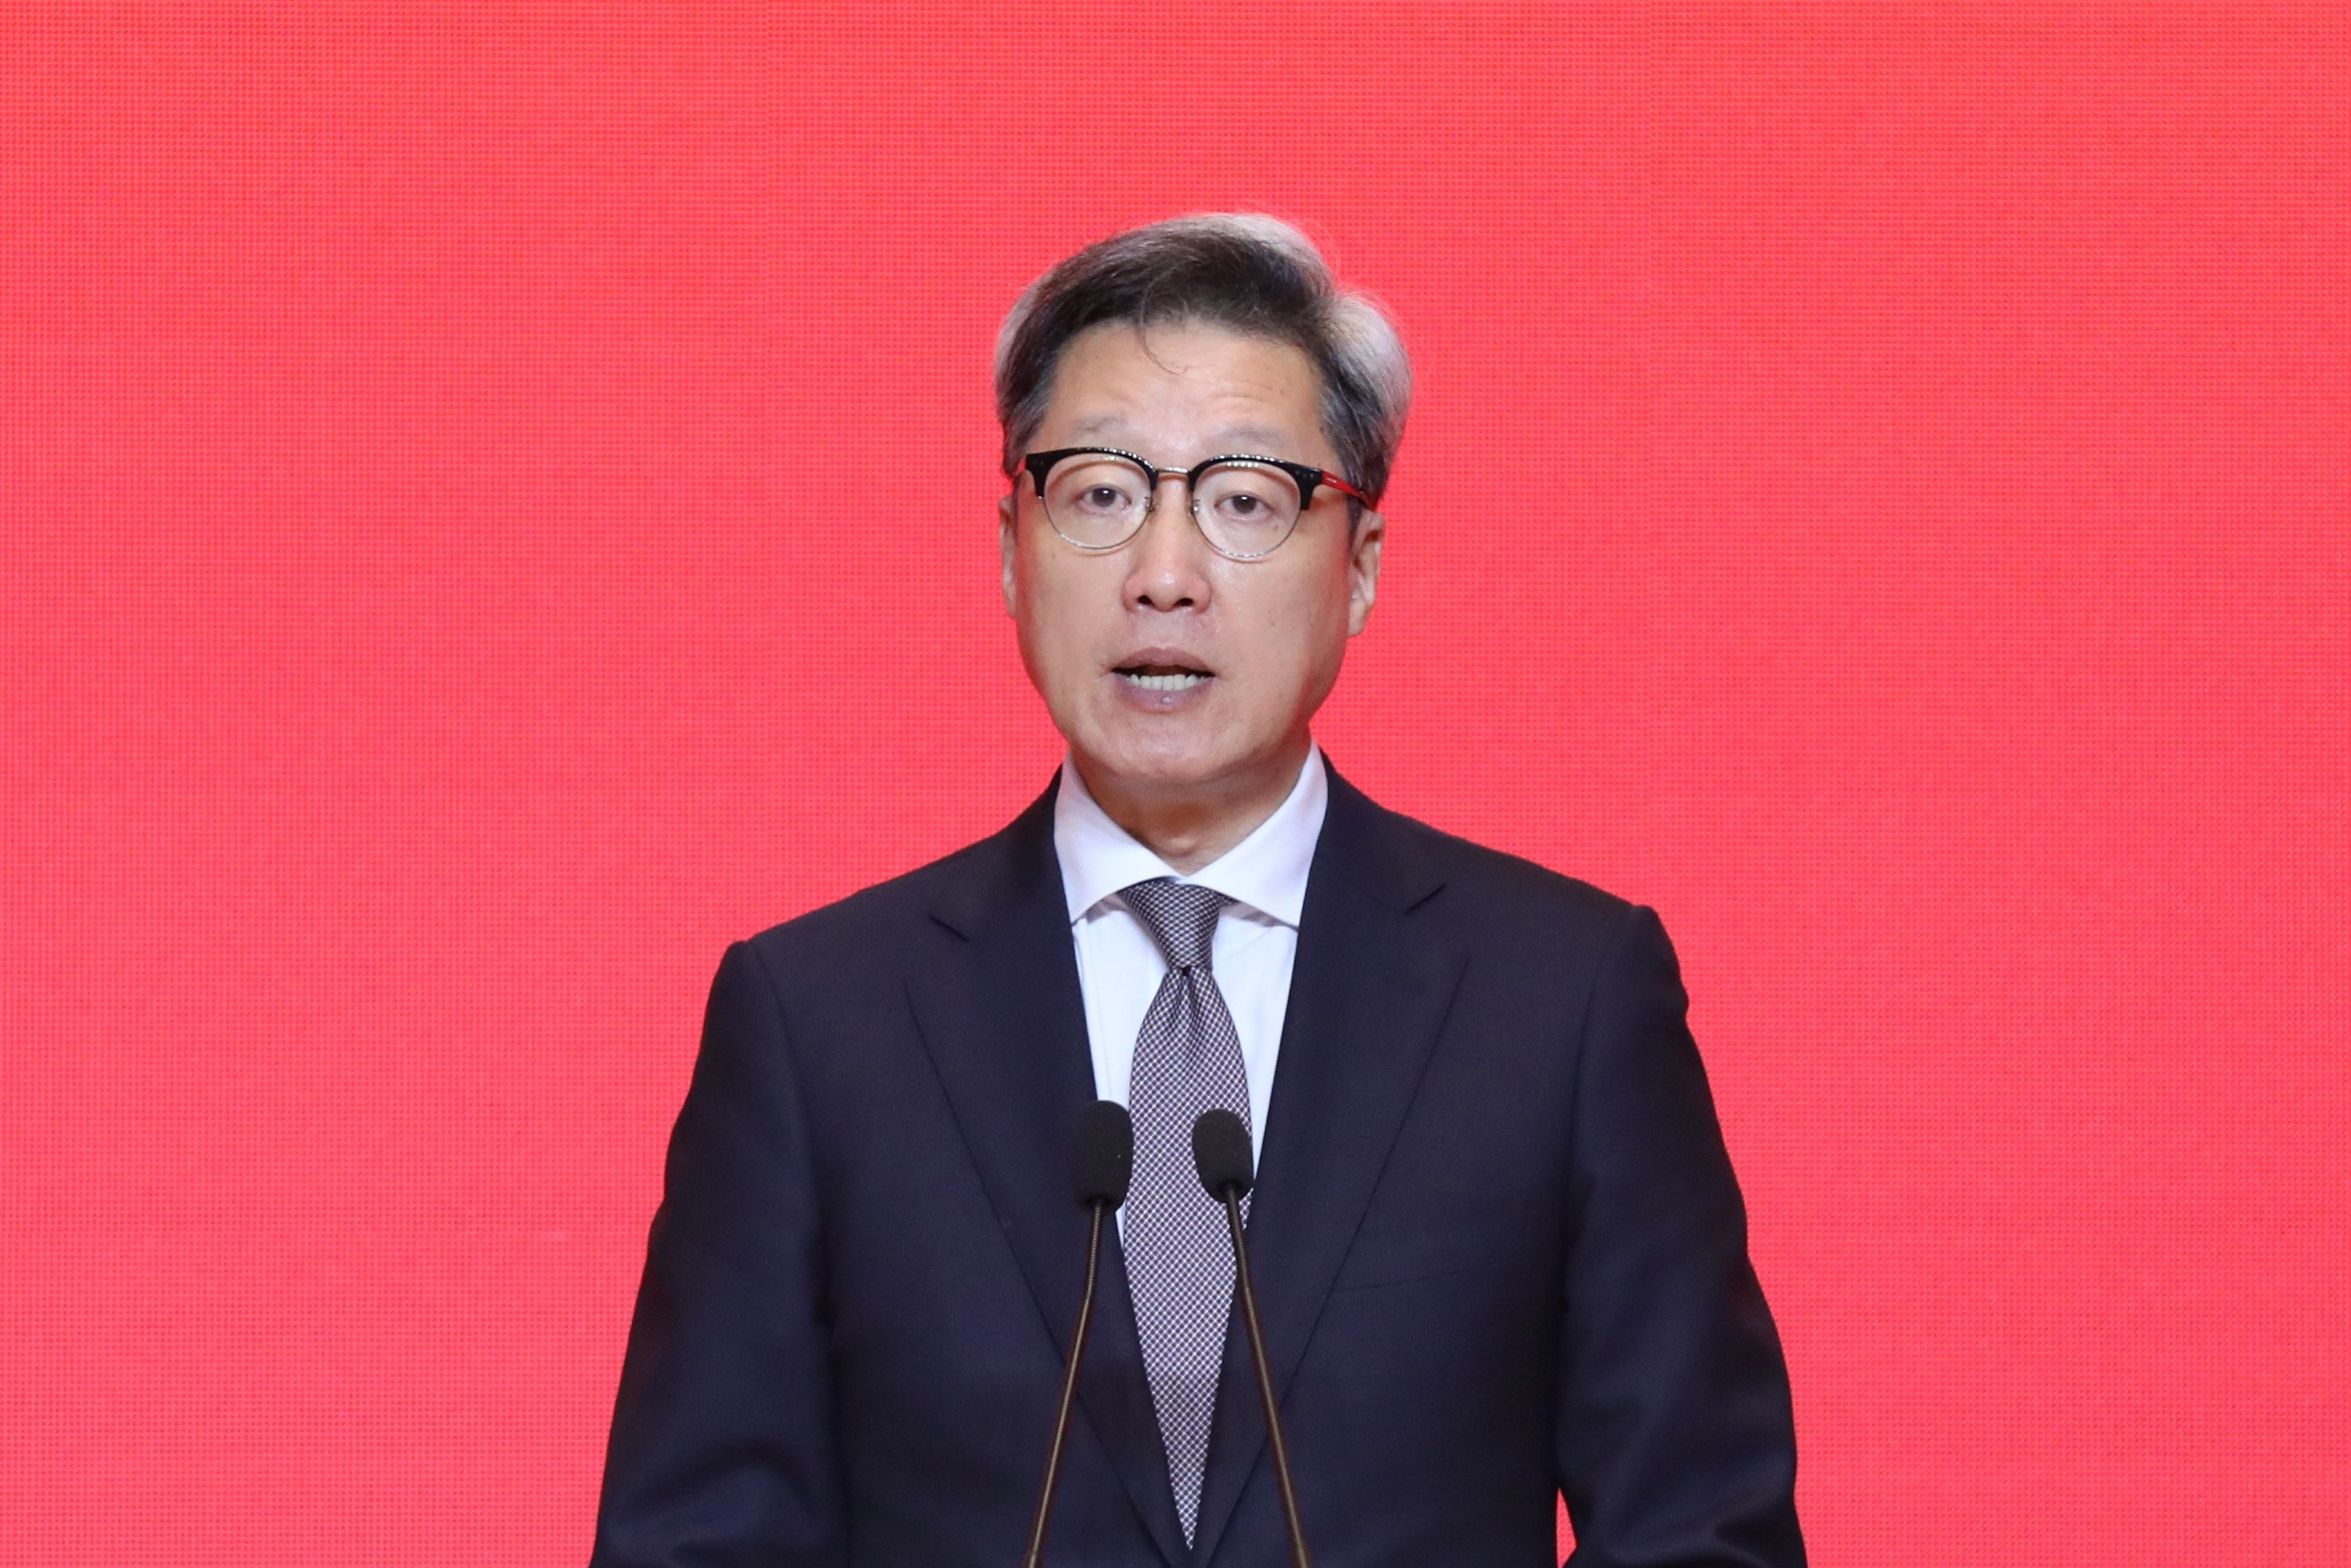 Chung Jae-ho, South Korea’s ambassador to China, speaks during an event in August 2022. Photo: VCG via Getty Images